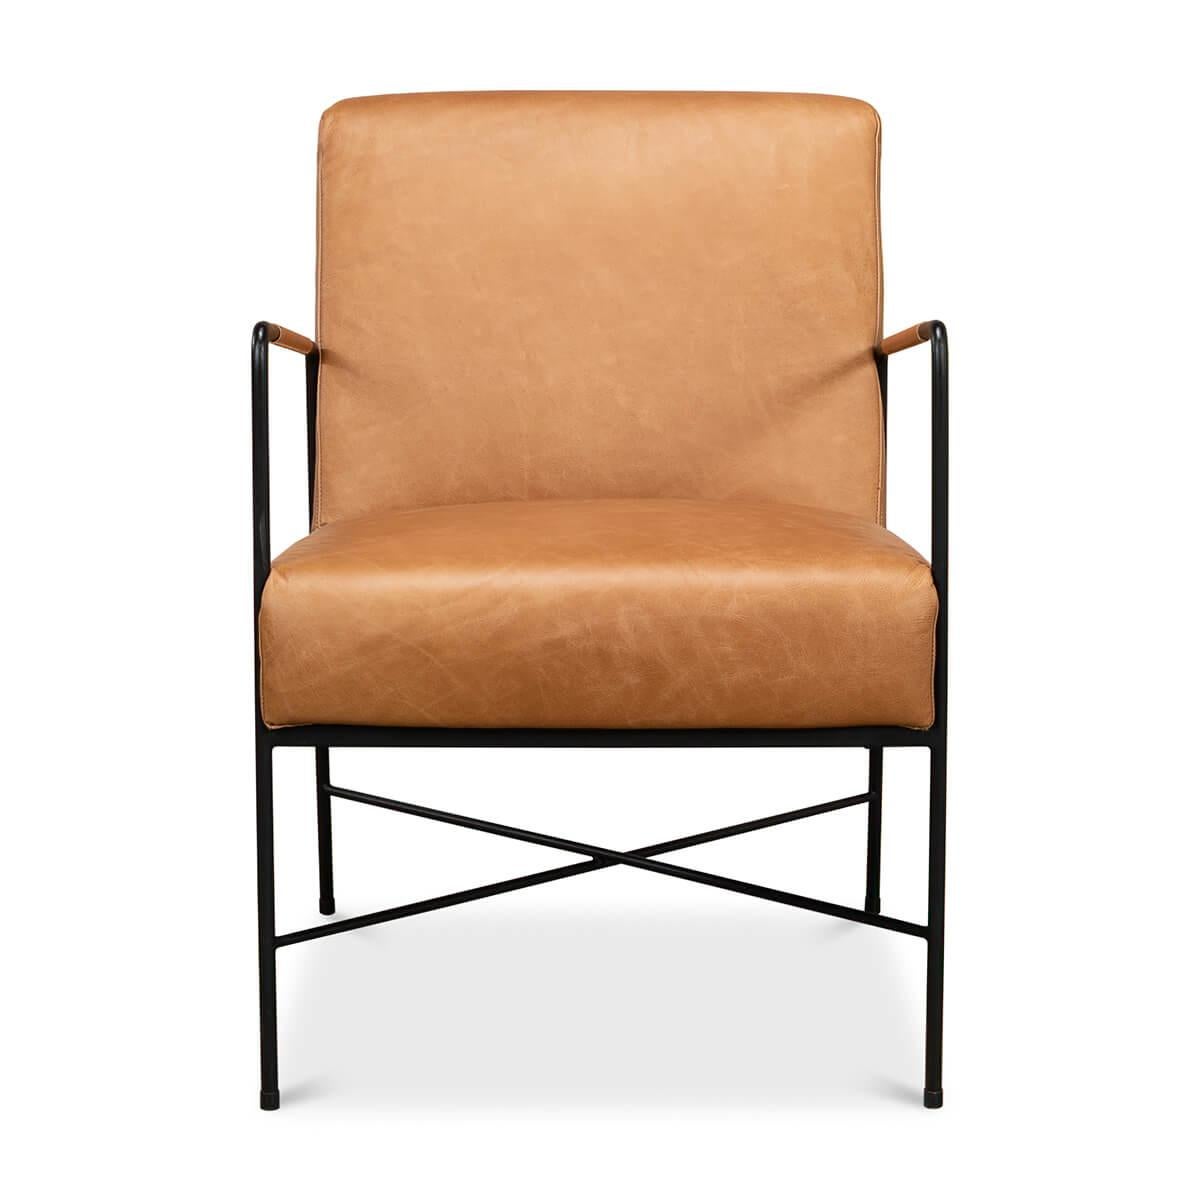 Modern leather iron armchair with light harness brown leather cushion backrest and seat on a modern iron chair frame.

Dimensions: 22